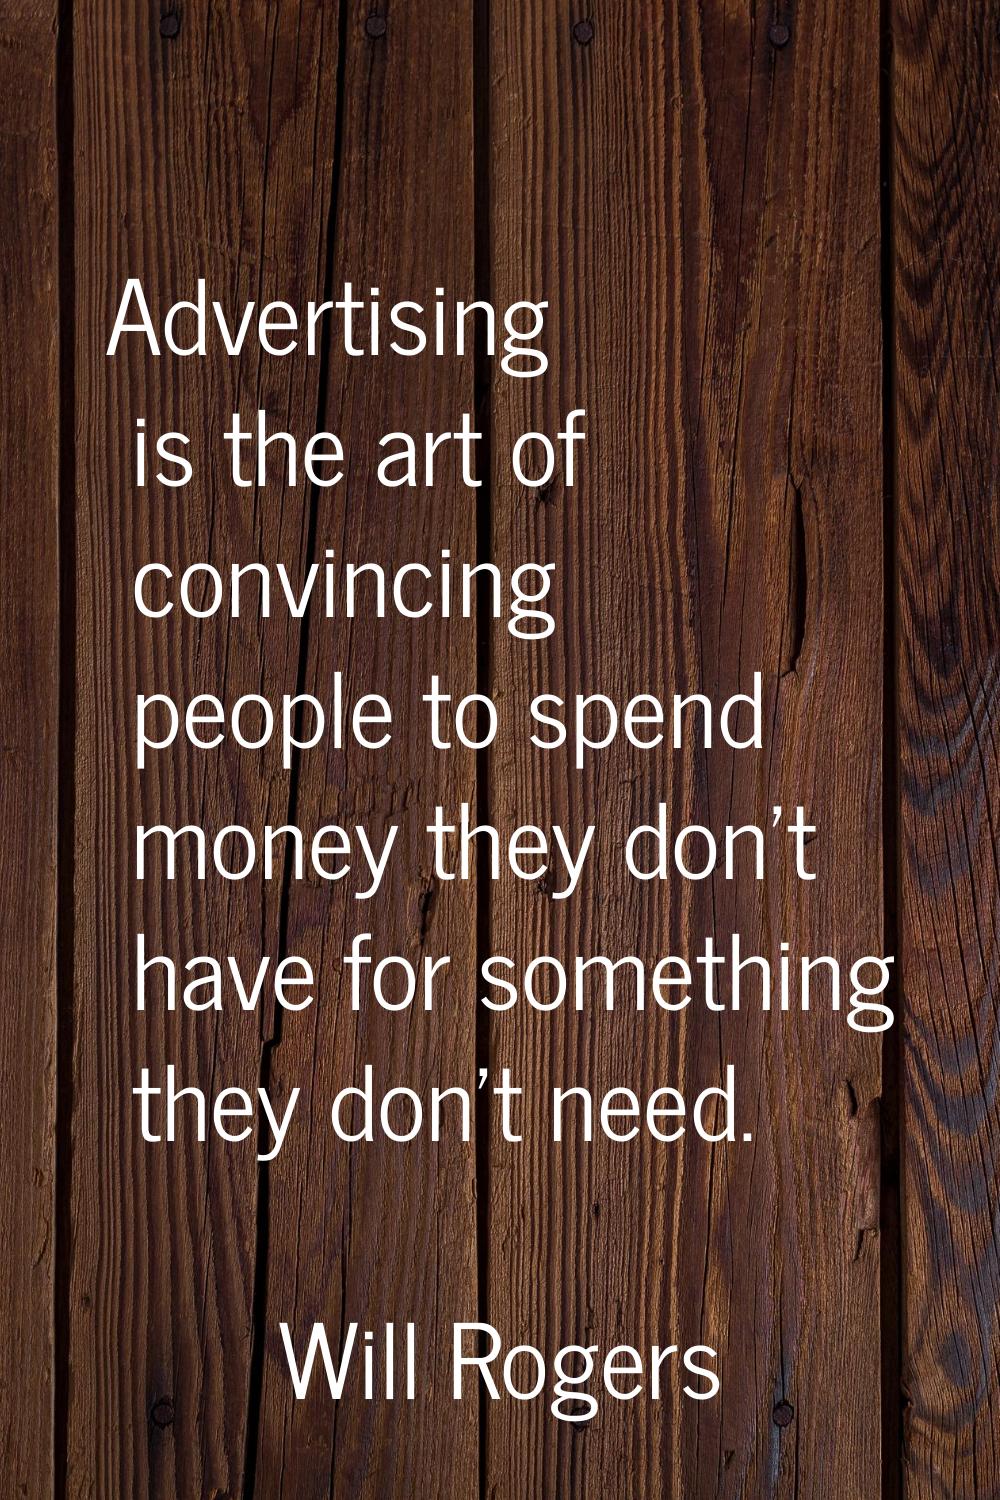 Advertising is the art of convincing people to spend money they don't have for something they don't